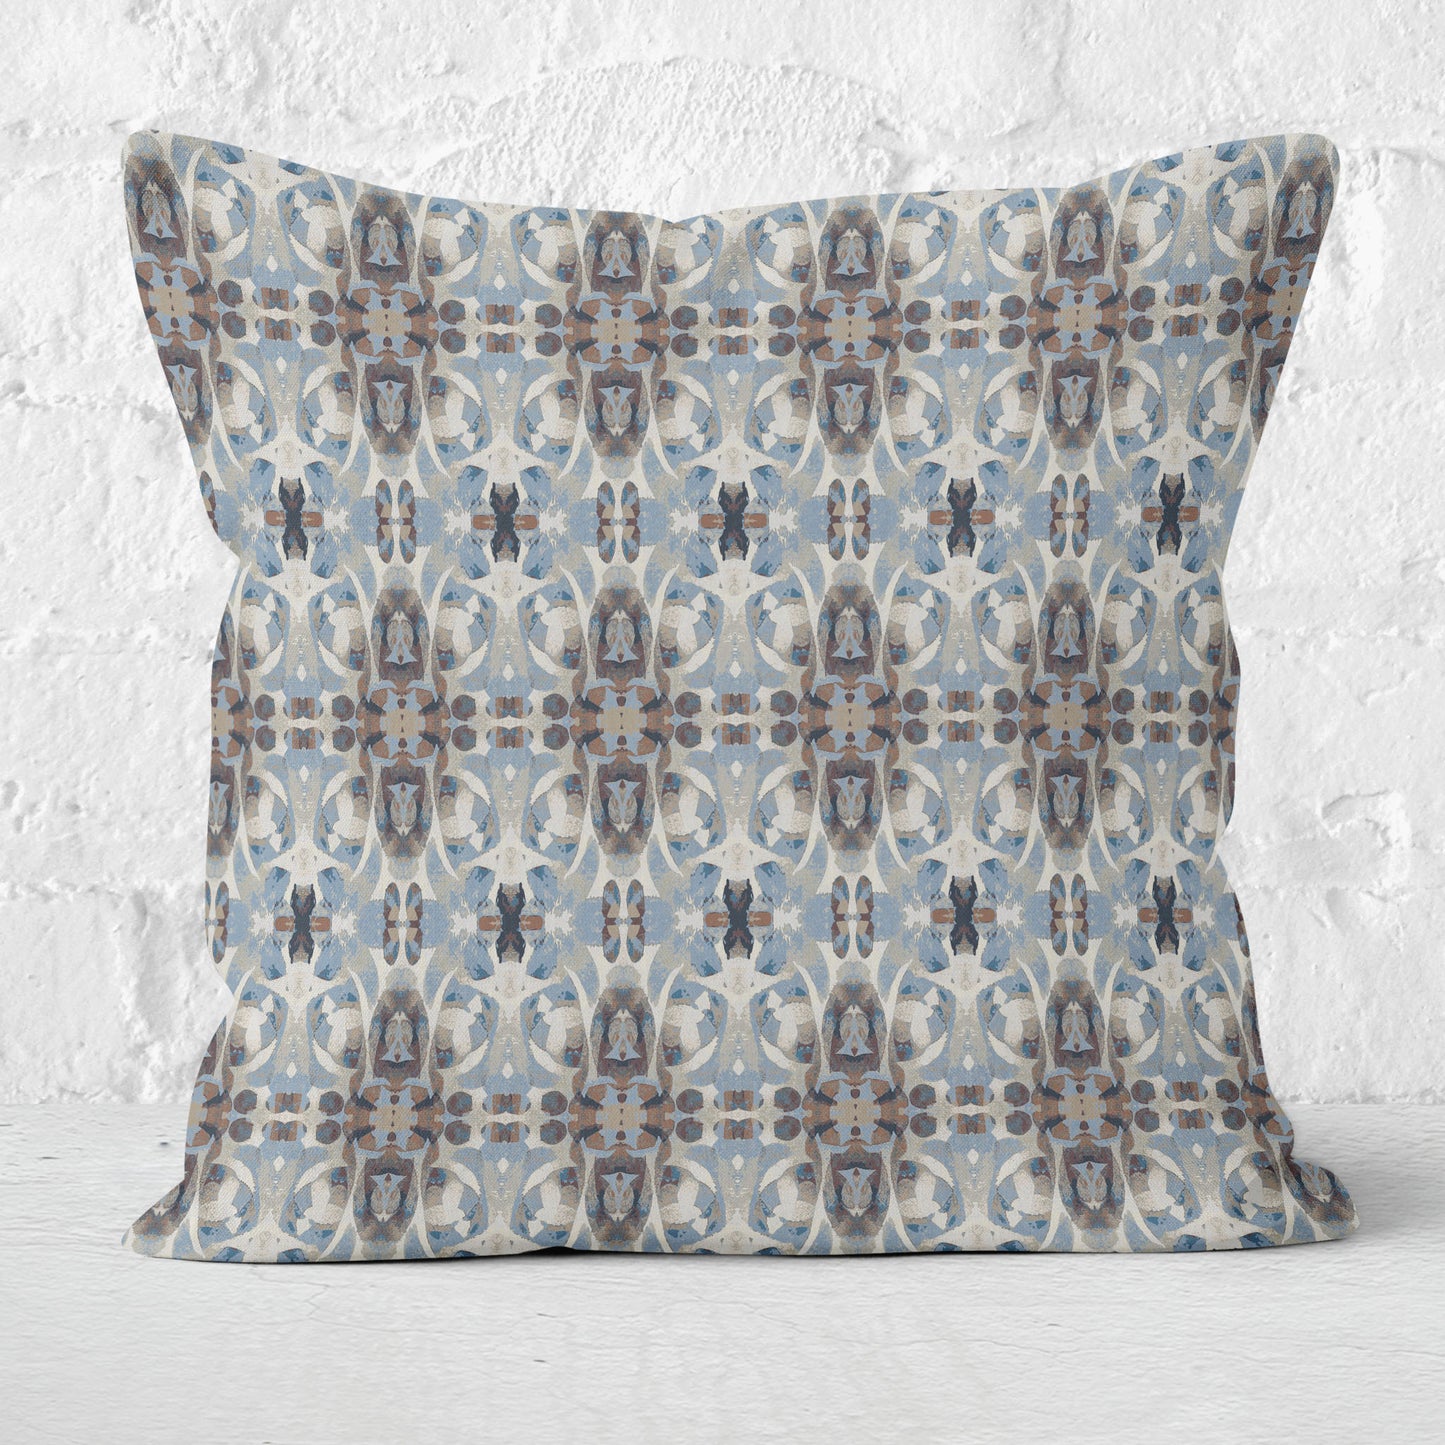 Square throw pillow featuring a blue and brown abstract painted pattern, set against a white brick background